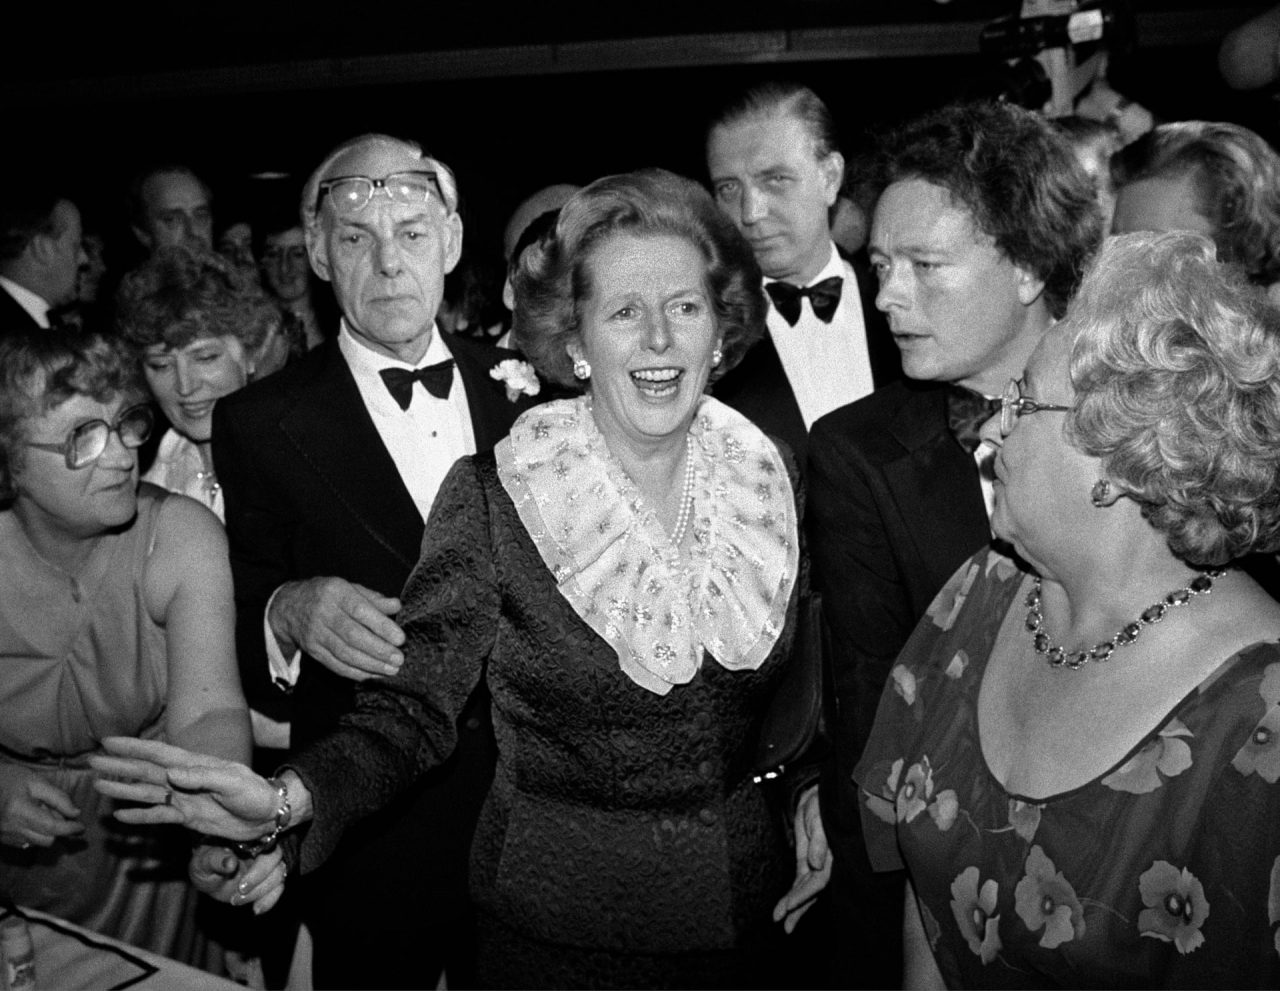 Margaret Thatcher and husband Denis attend a ball during the Conservative party conference in Brighton, 11 October 1984.